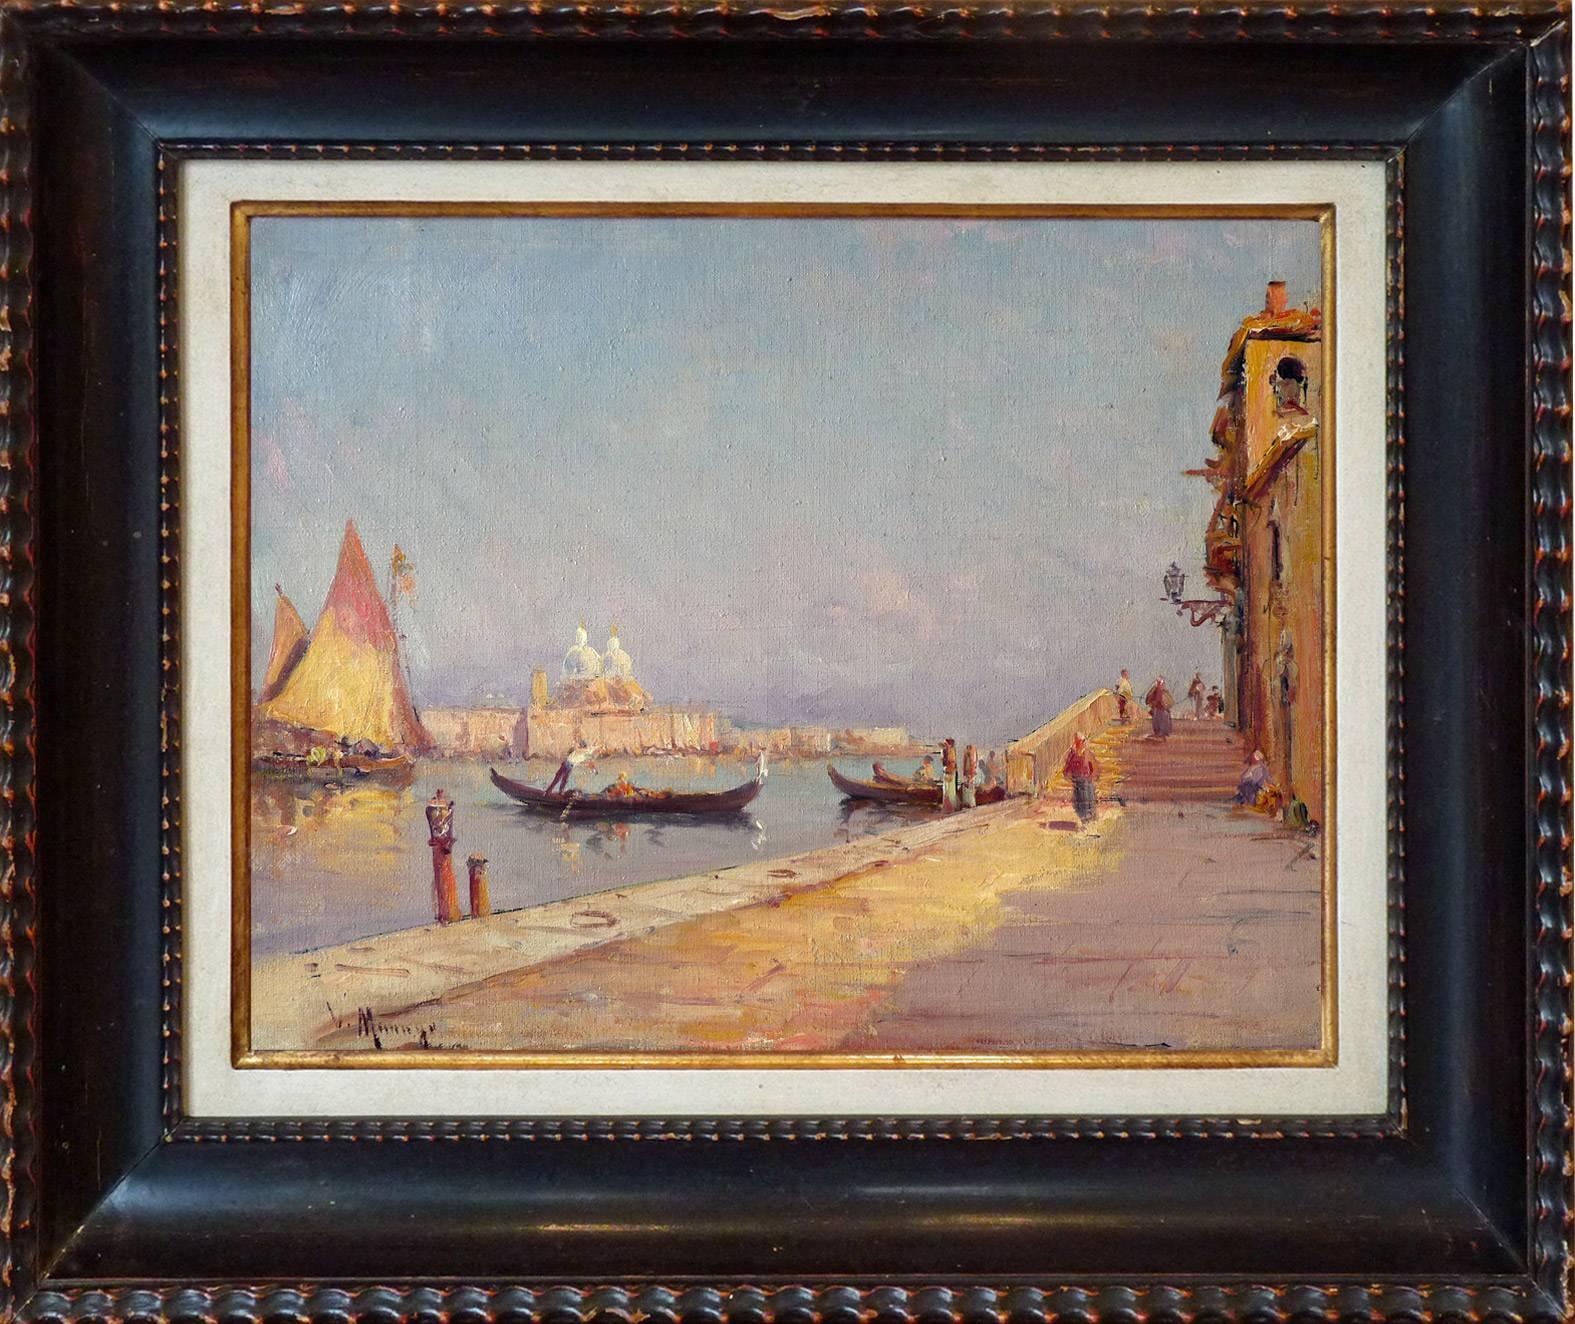 An atmospheric Venice view, c.1910, by Vincent Manago, a French vedute painter and painter in the Orientalist style.

Oil on canvas, signed lower left.
Painting size 10.83 x 13.98 in. (27.5 x 35.5 cm)
Frame size 16.34 x 19.69 in. (41.5 x 50